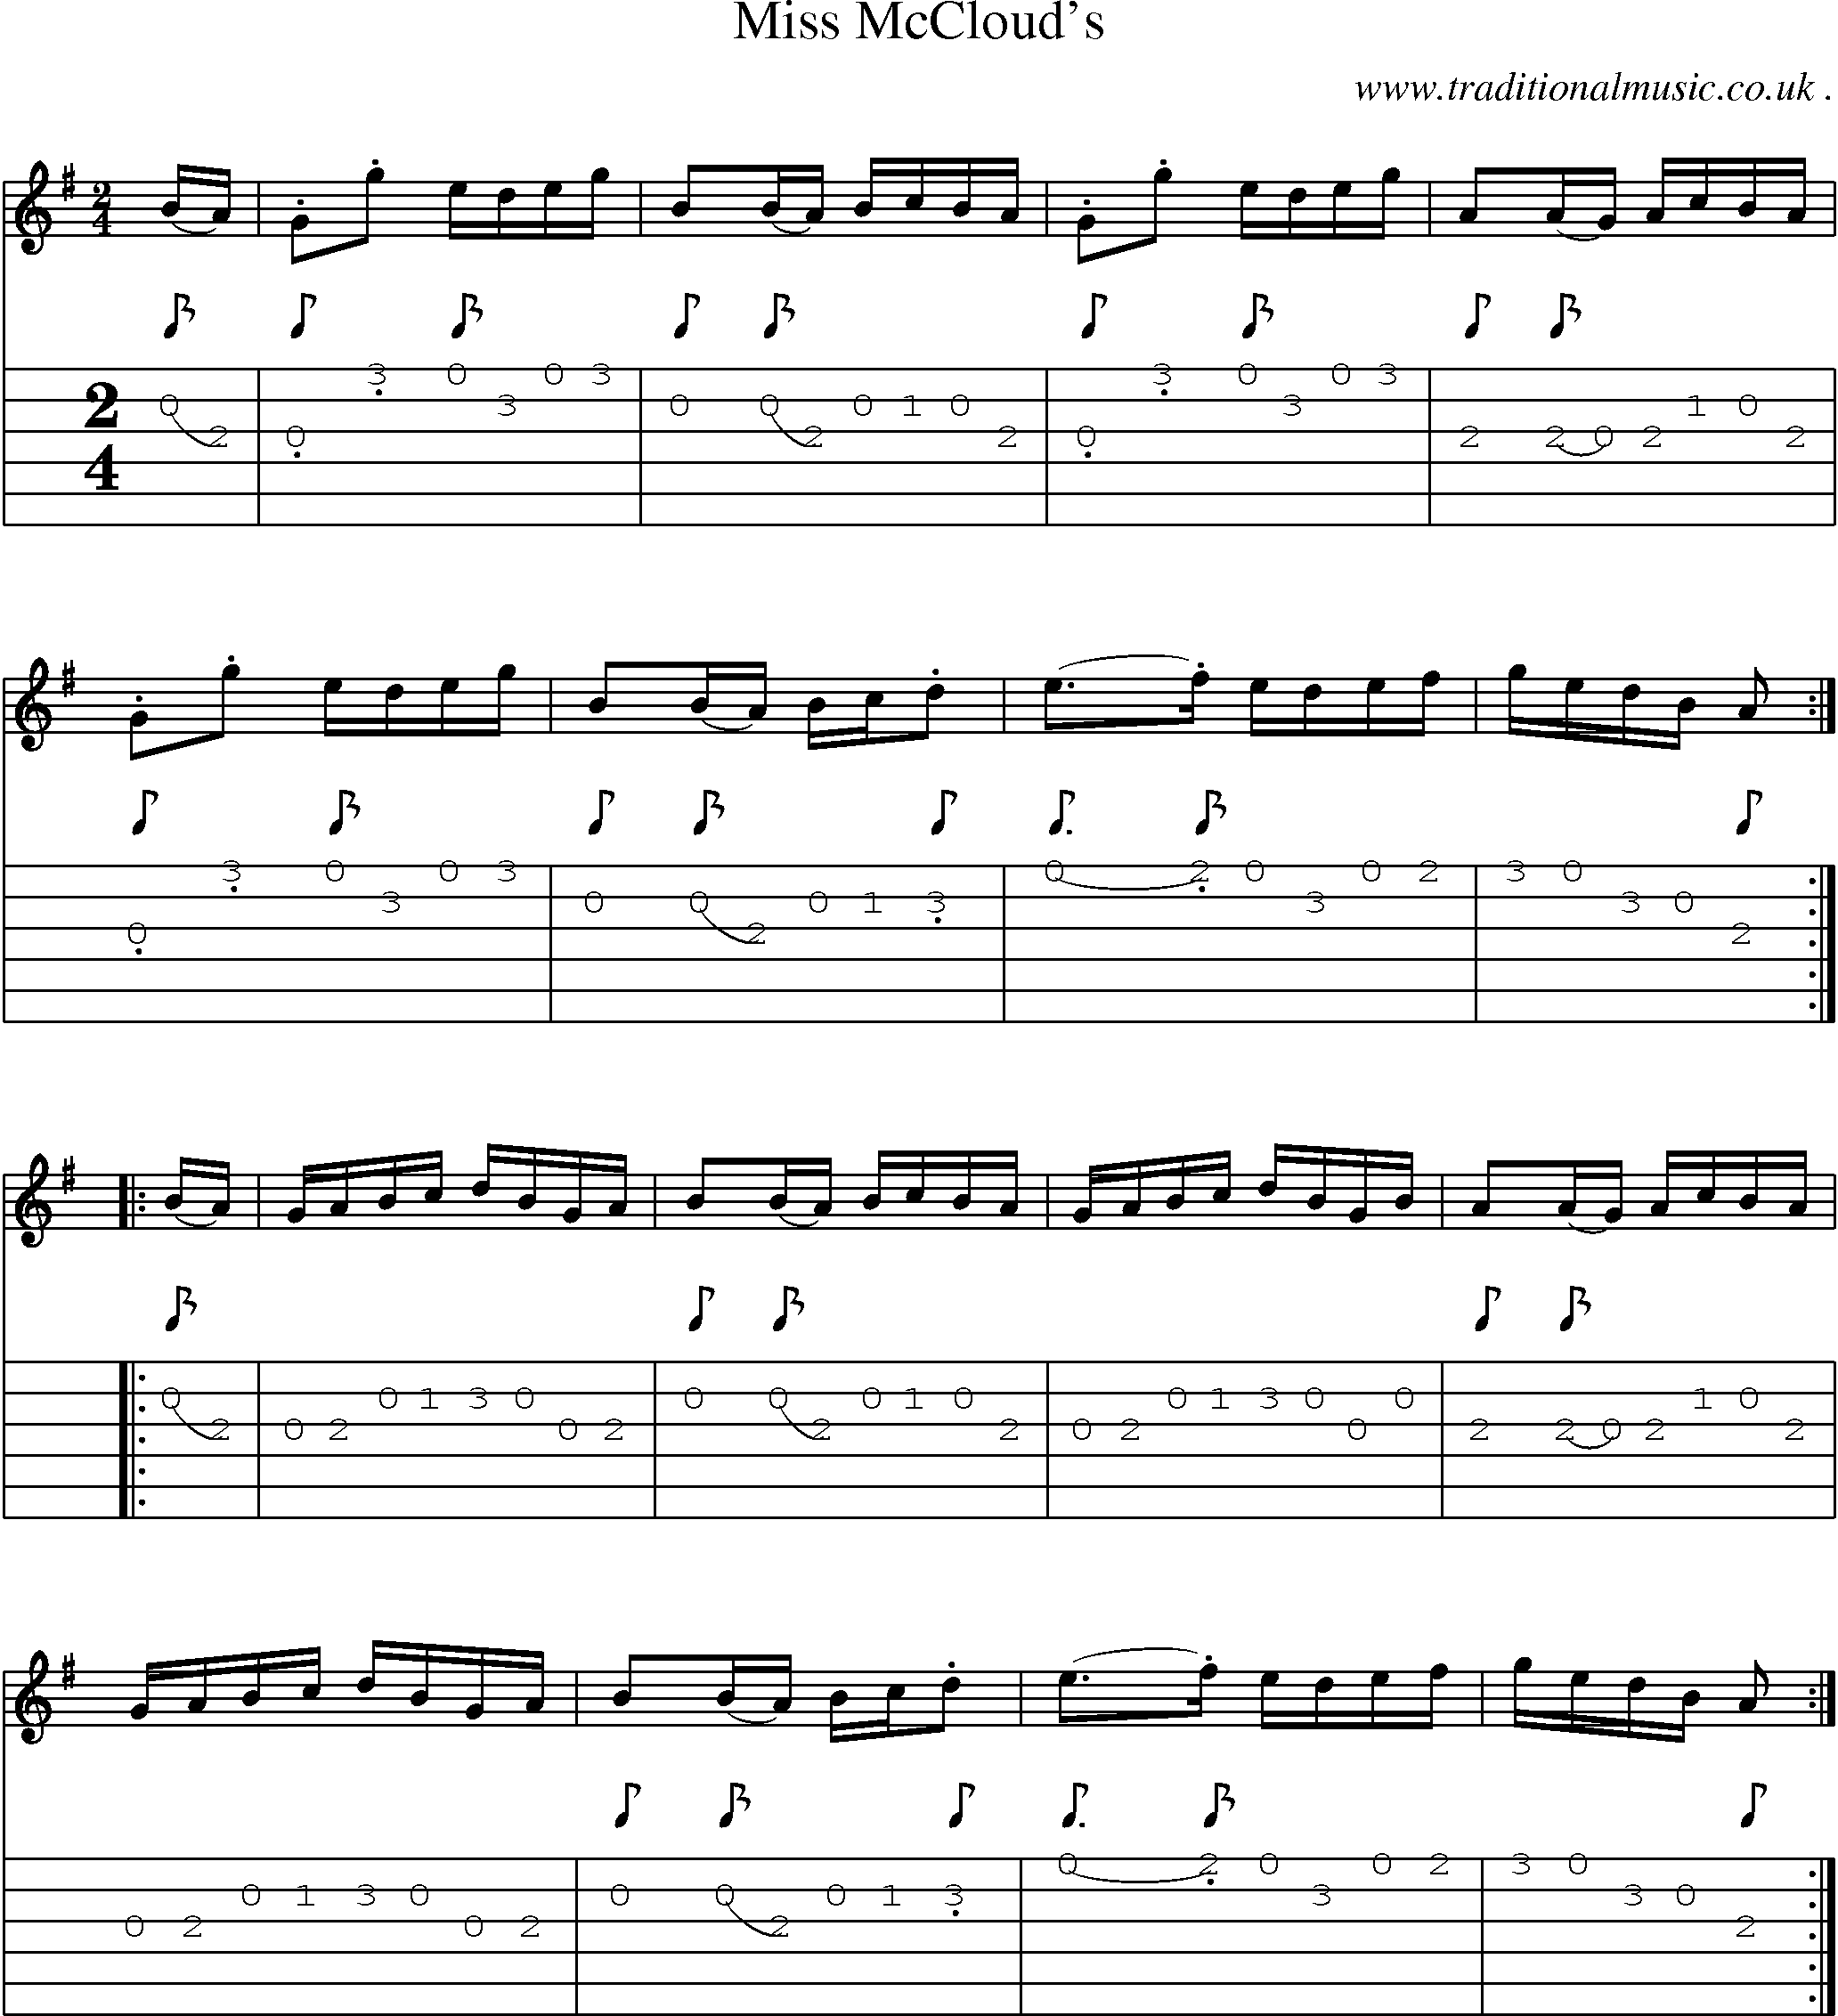 Sheet-Music and Guitar Tabs for Miss Mcclouds